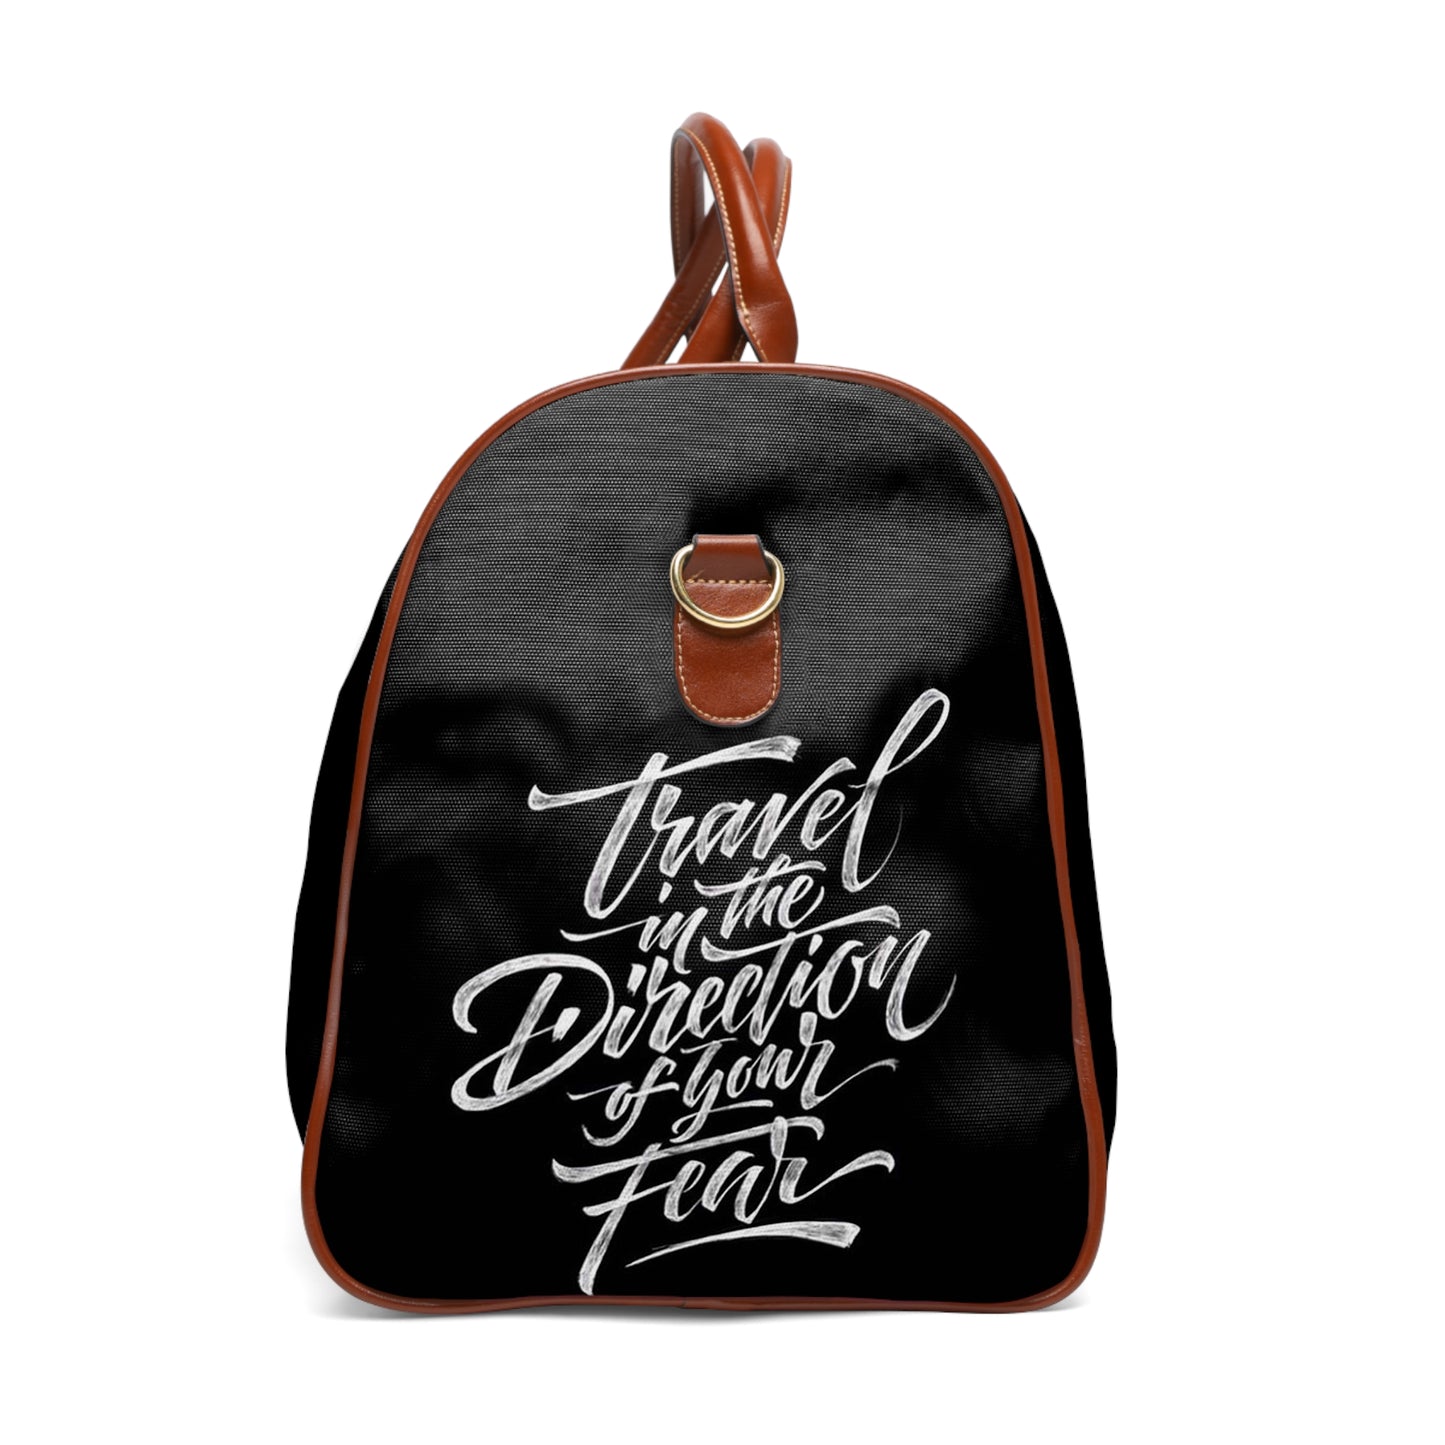 Adventure-Ready: Waterproof Travel Bag with Inspiring Quotes and Stylish Designs (EAT, SLEEP, WORK, TRAVEL, REPEAT)